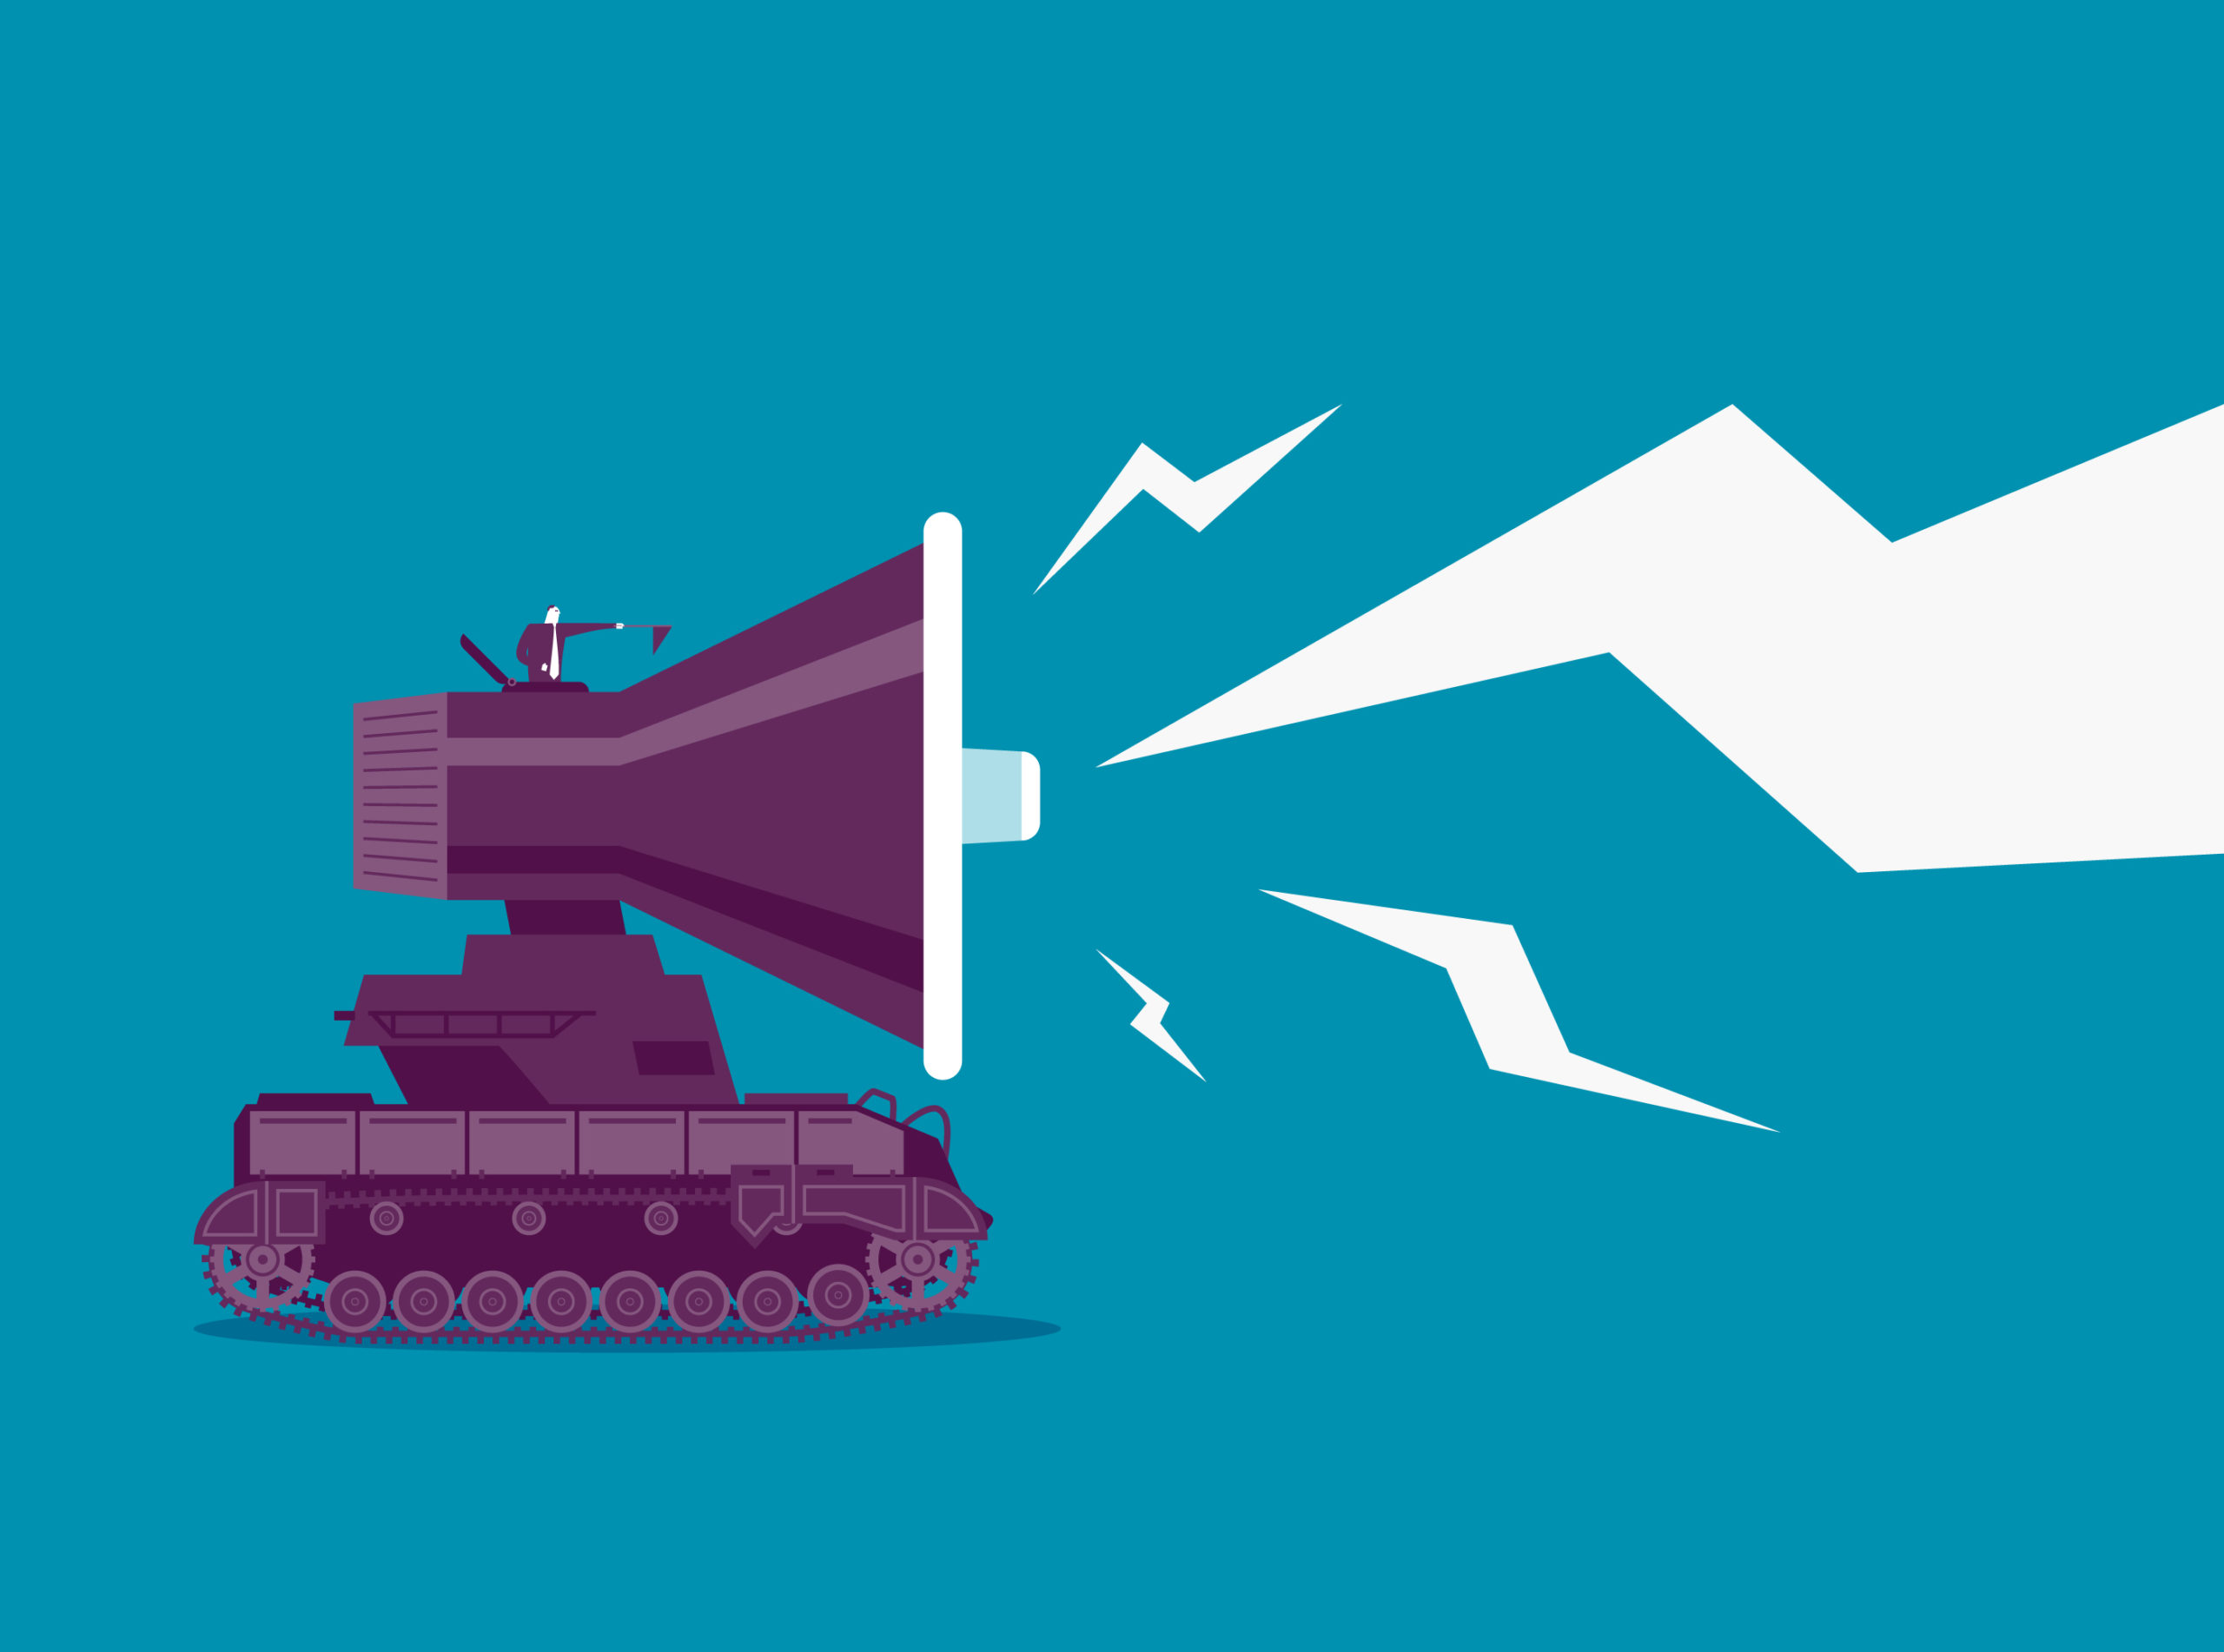 Tank illustration with megaphone and noise